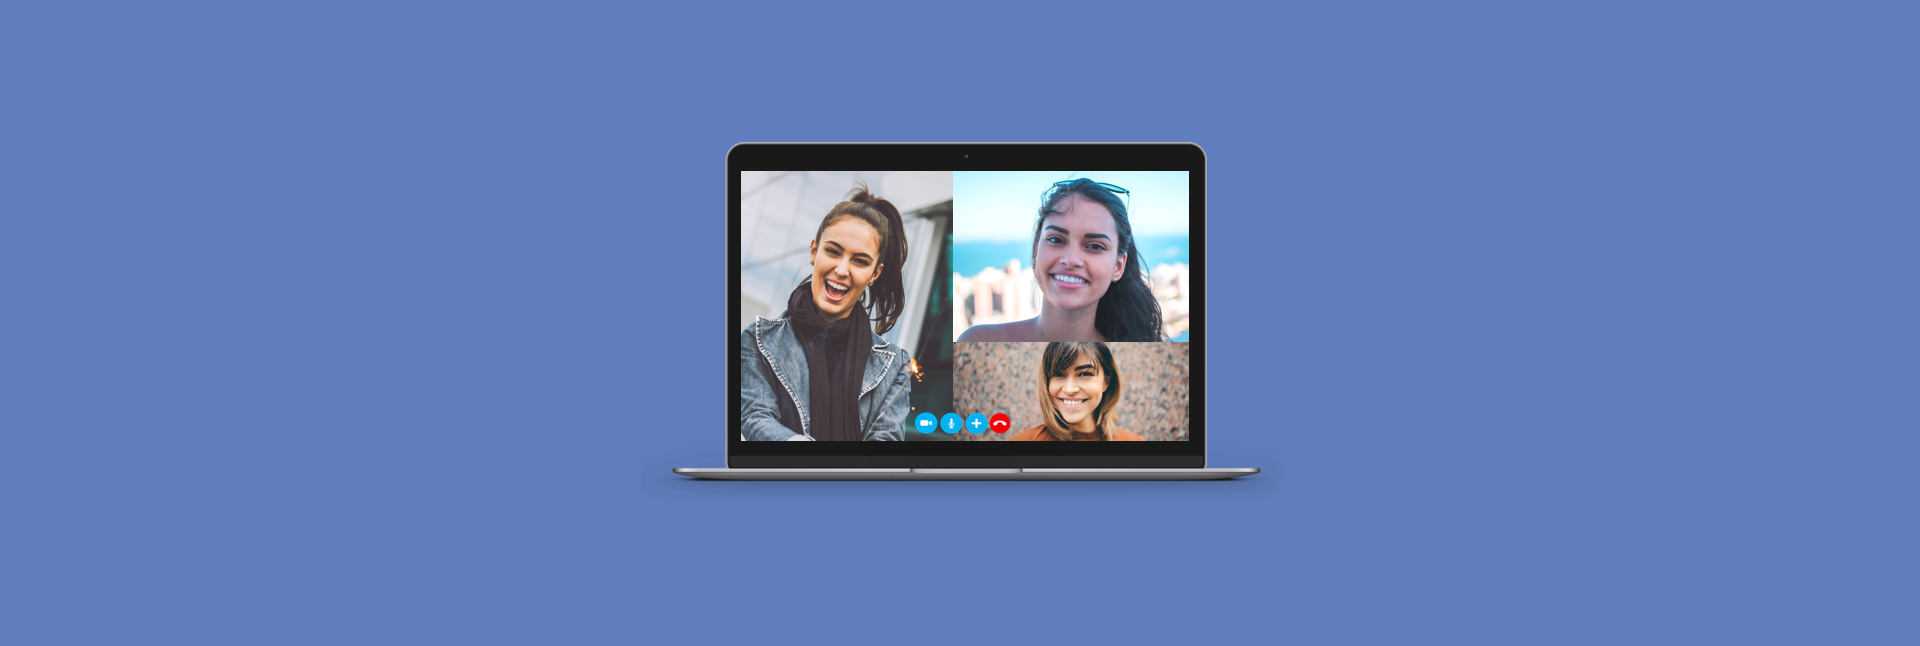 can skype for business on windows talk with mac